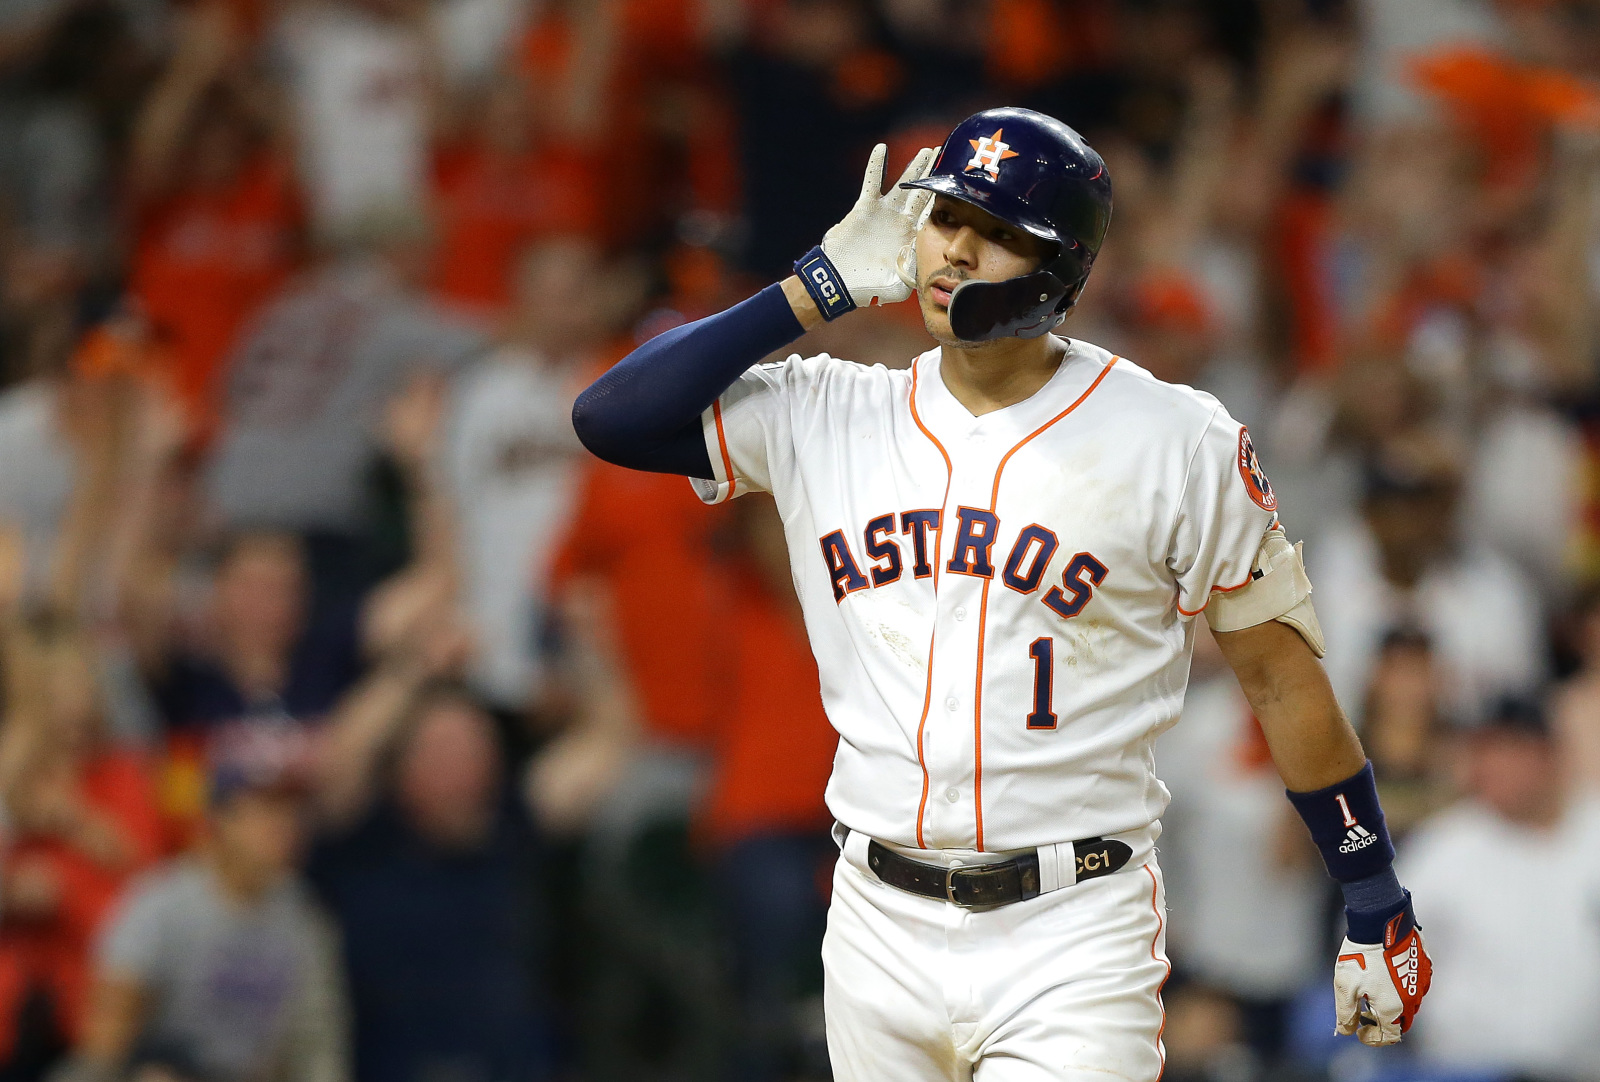 Carlos Correa Is Going Out on a High Note